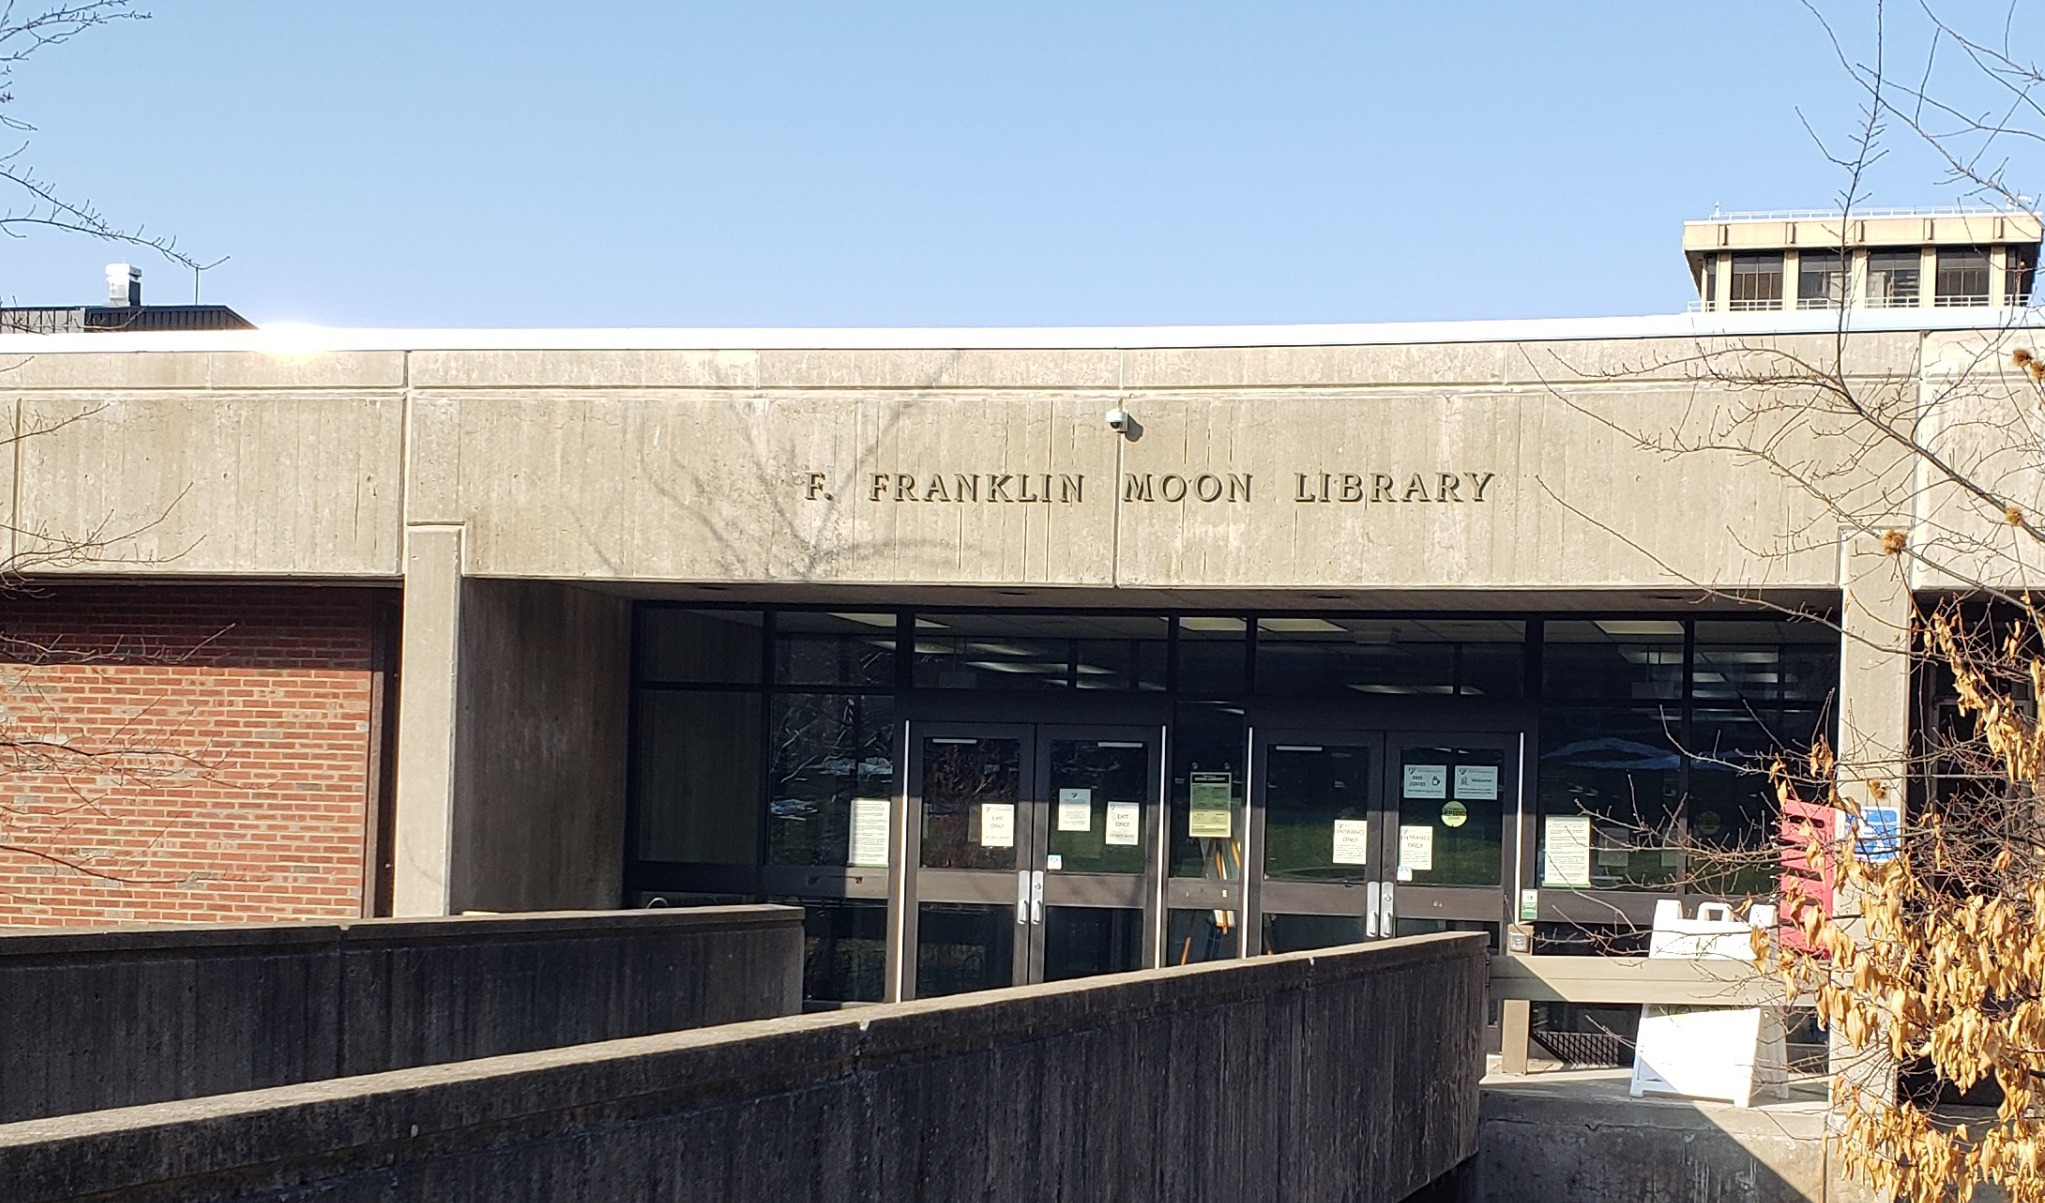 Moon Library